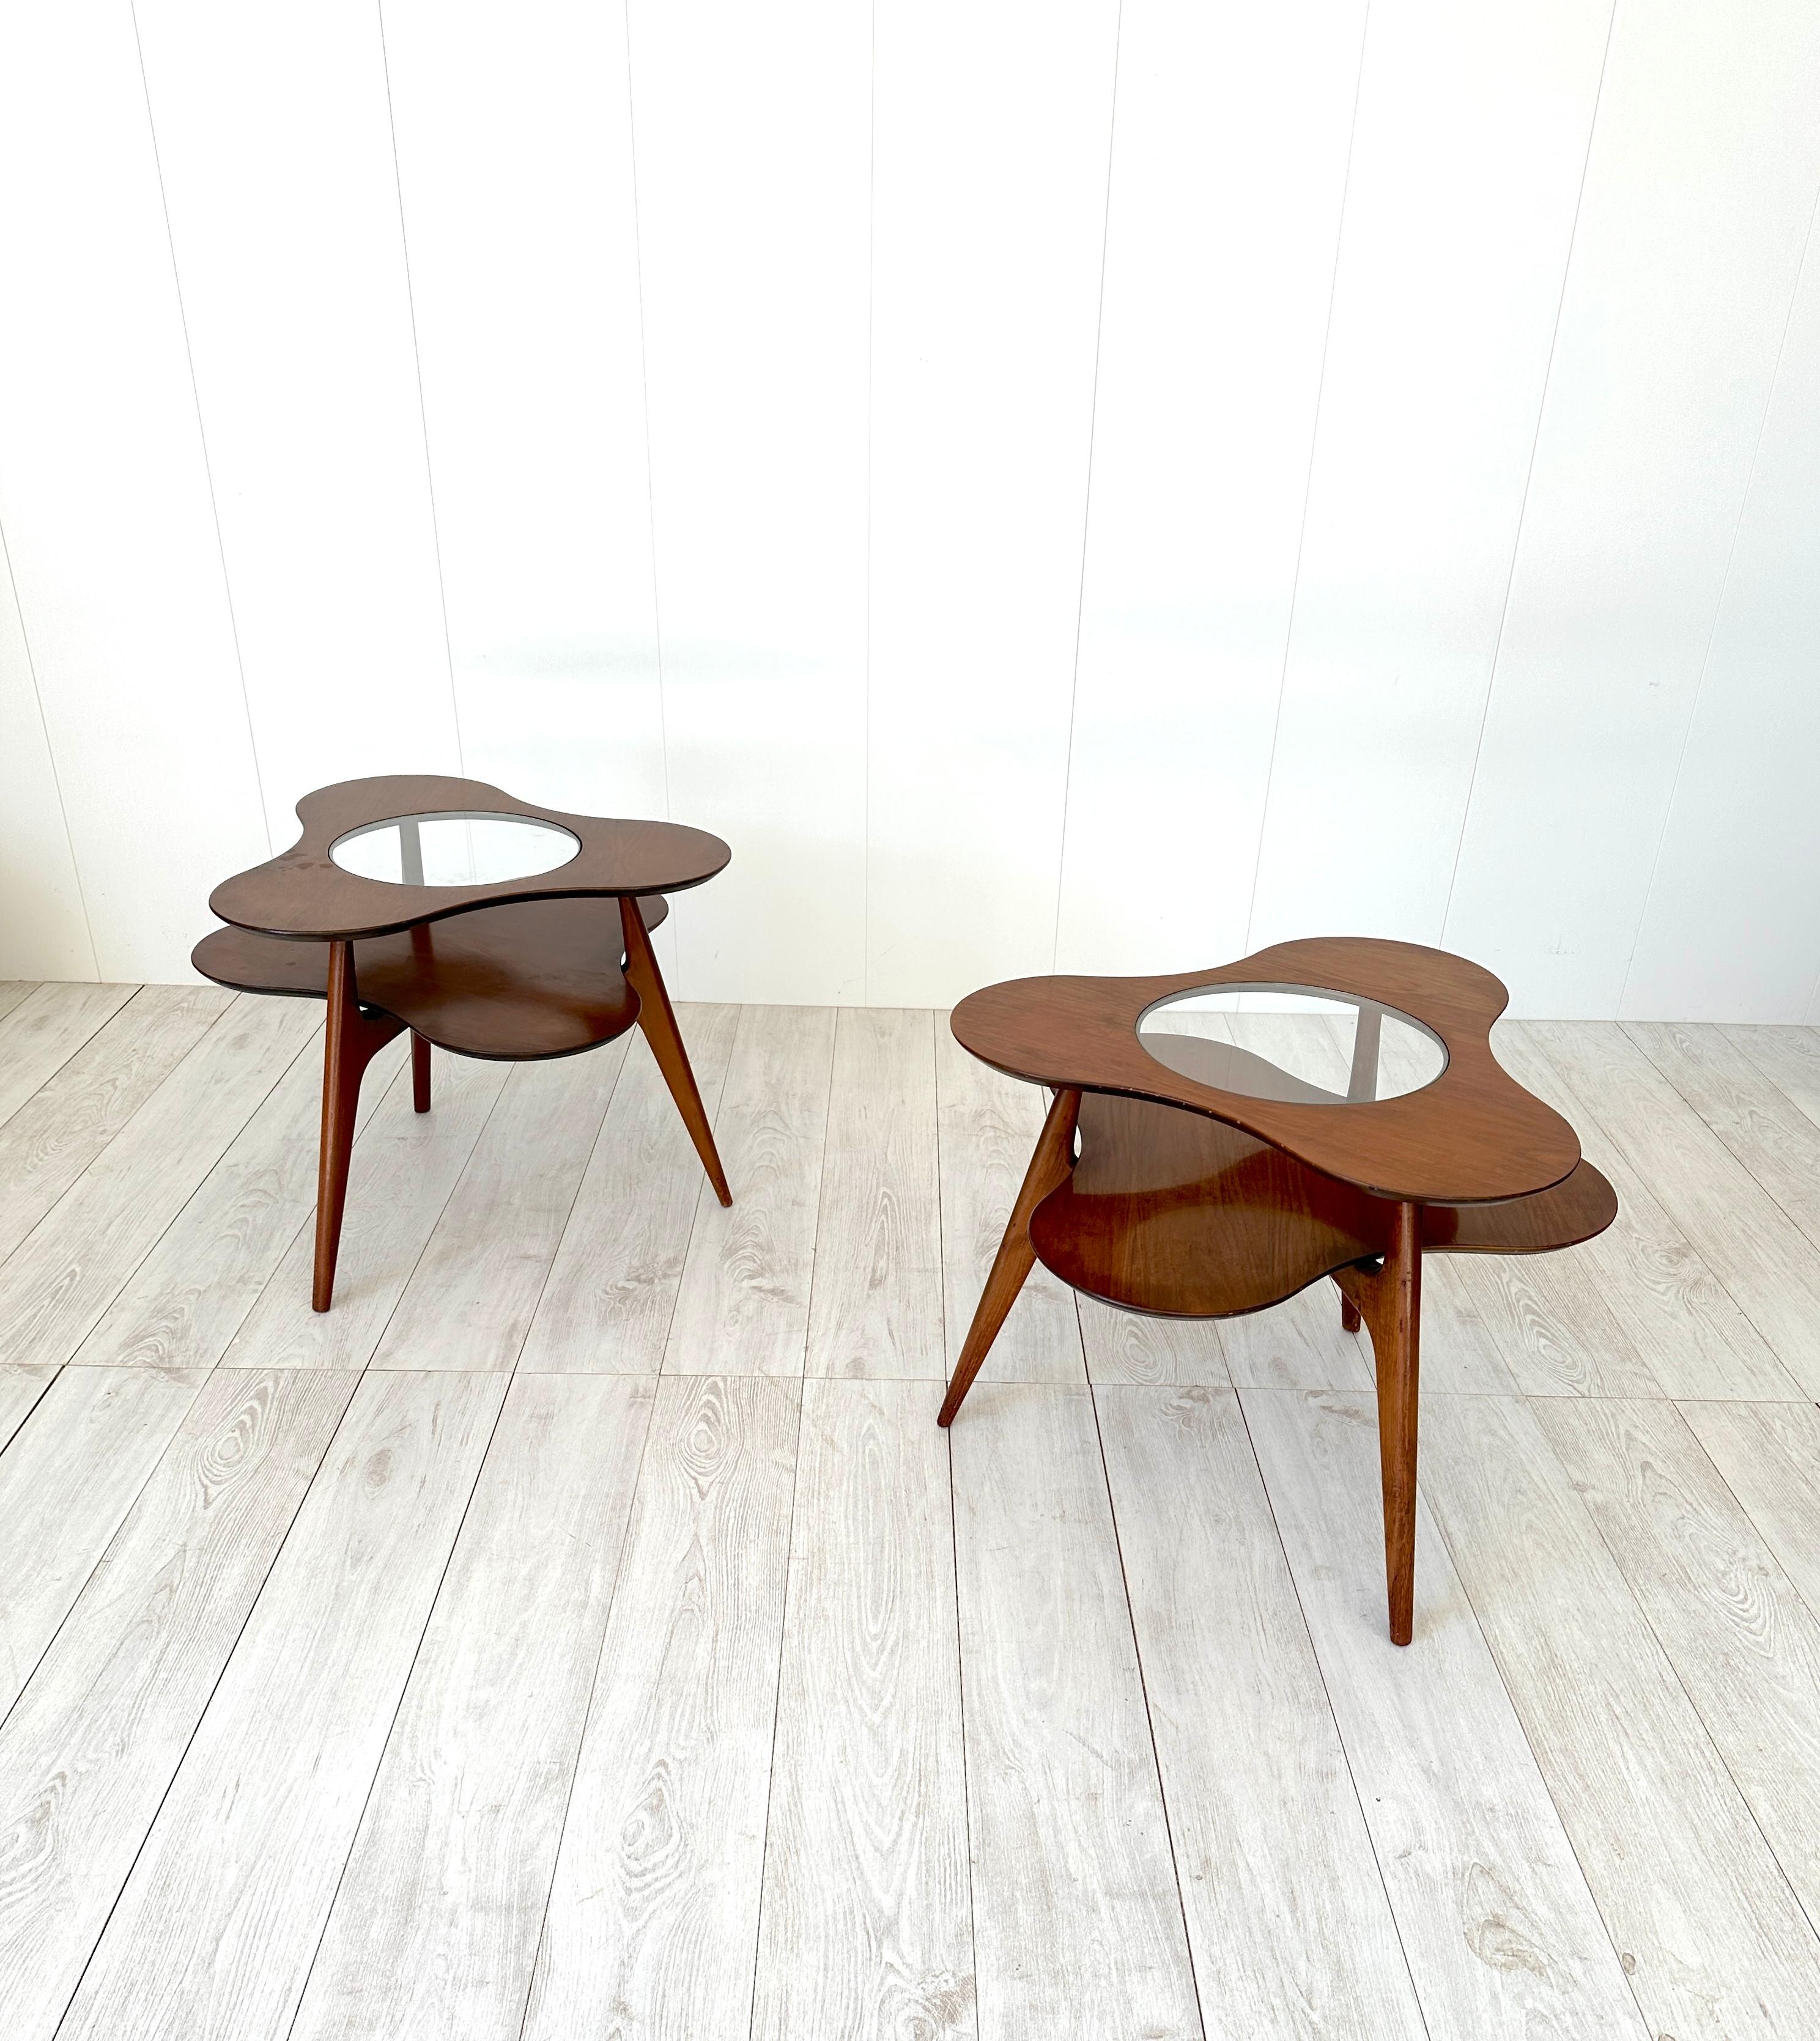 Peculiar pair of flower-shaped side tables made of wood with glass center part.
Production dates back to the 1950s. They make the environment elegant with a modern touch.
